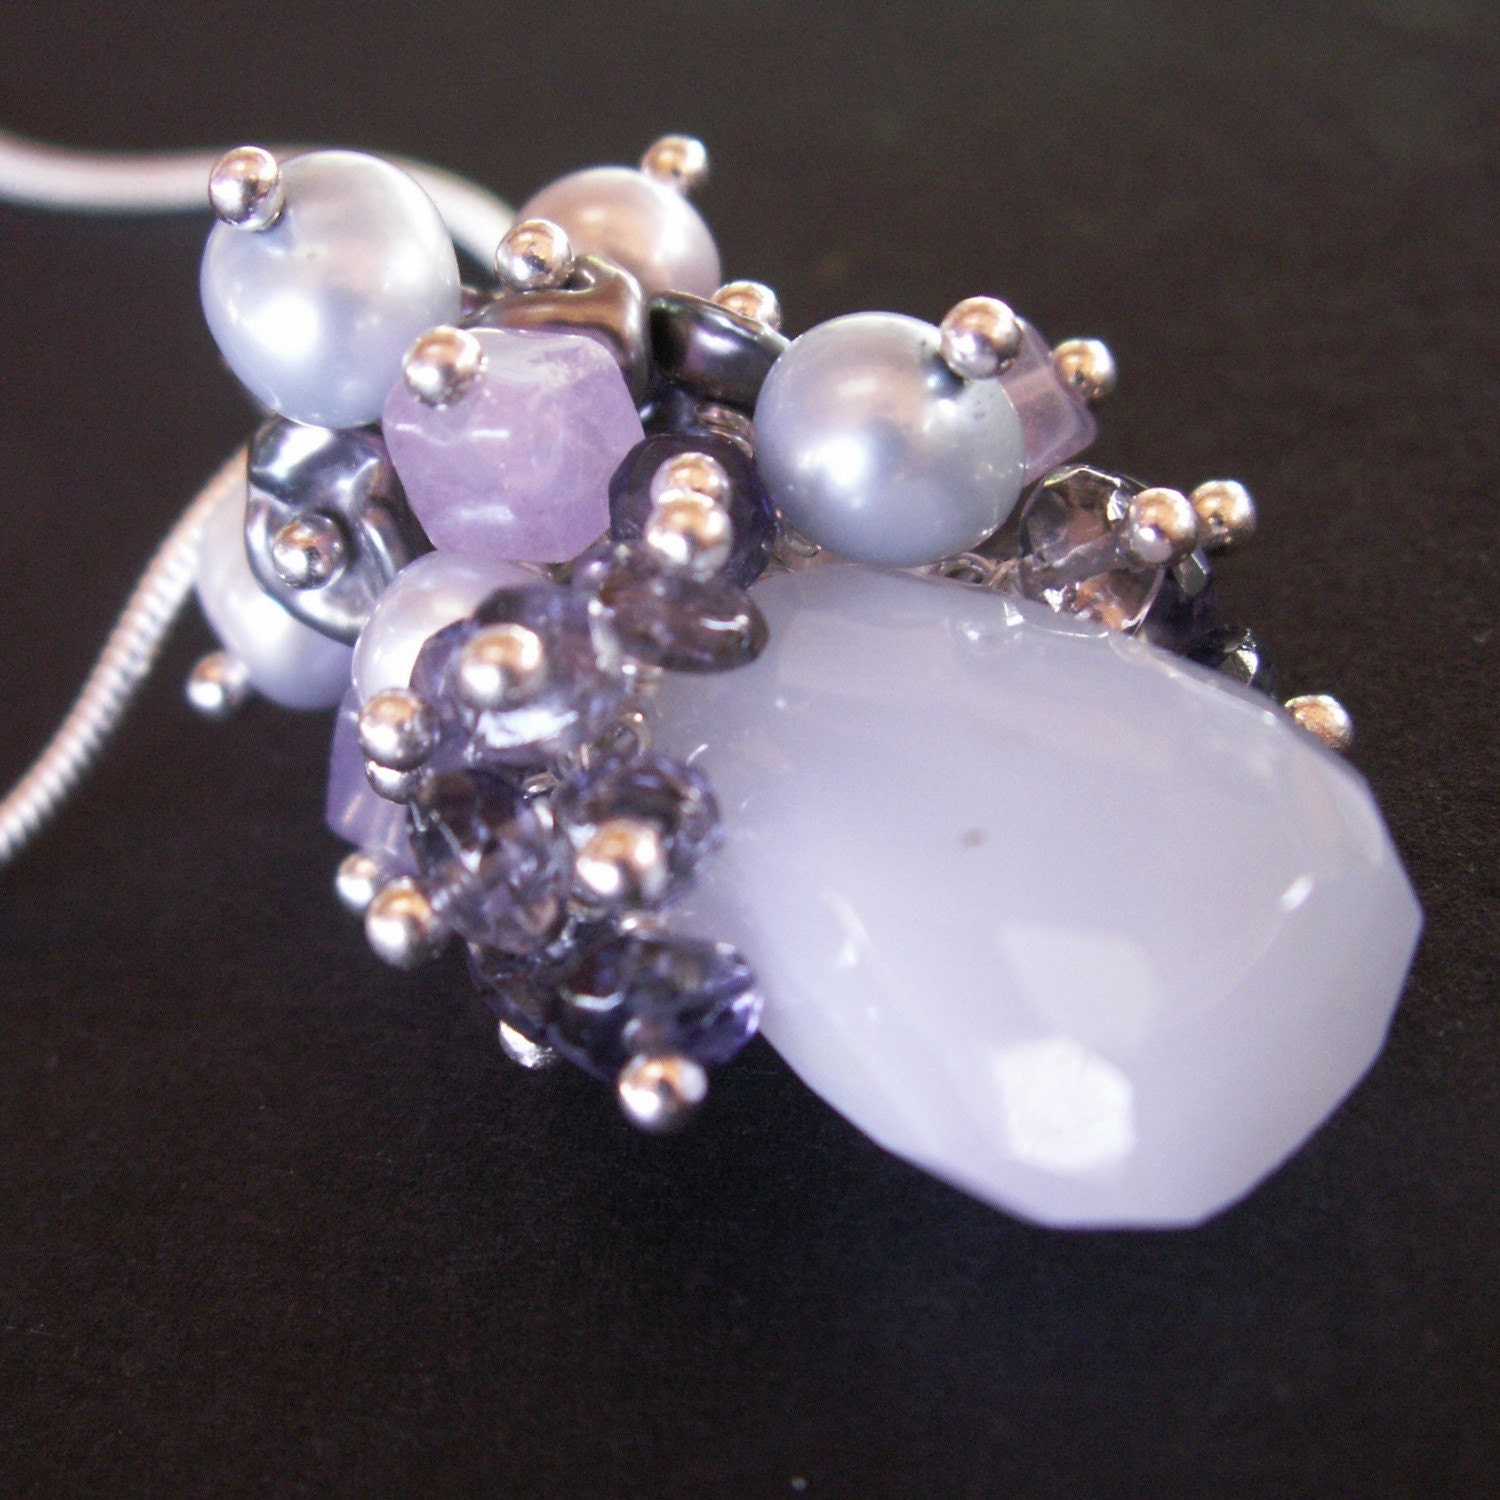 jewelry necklace chalcedony blue nugget iolite lavender pearls fluorite